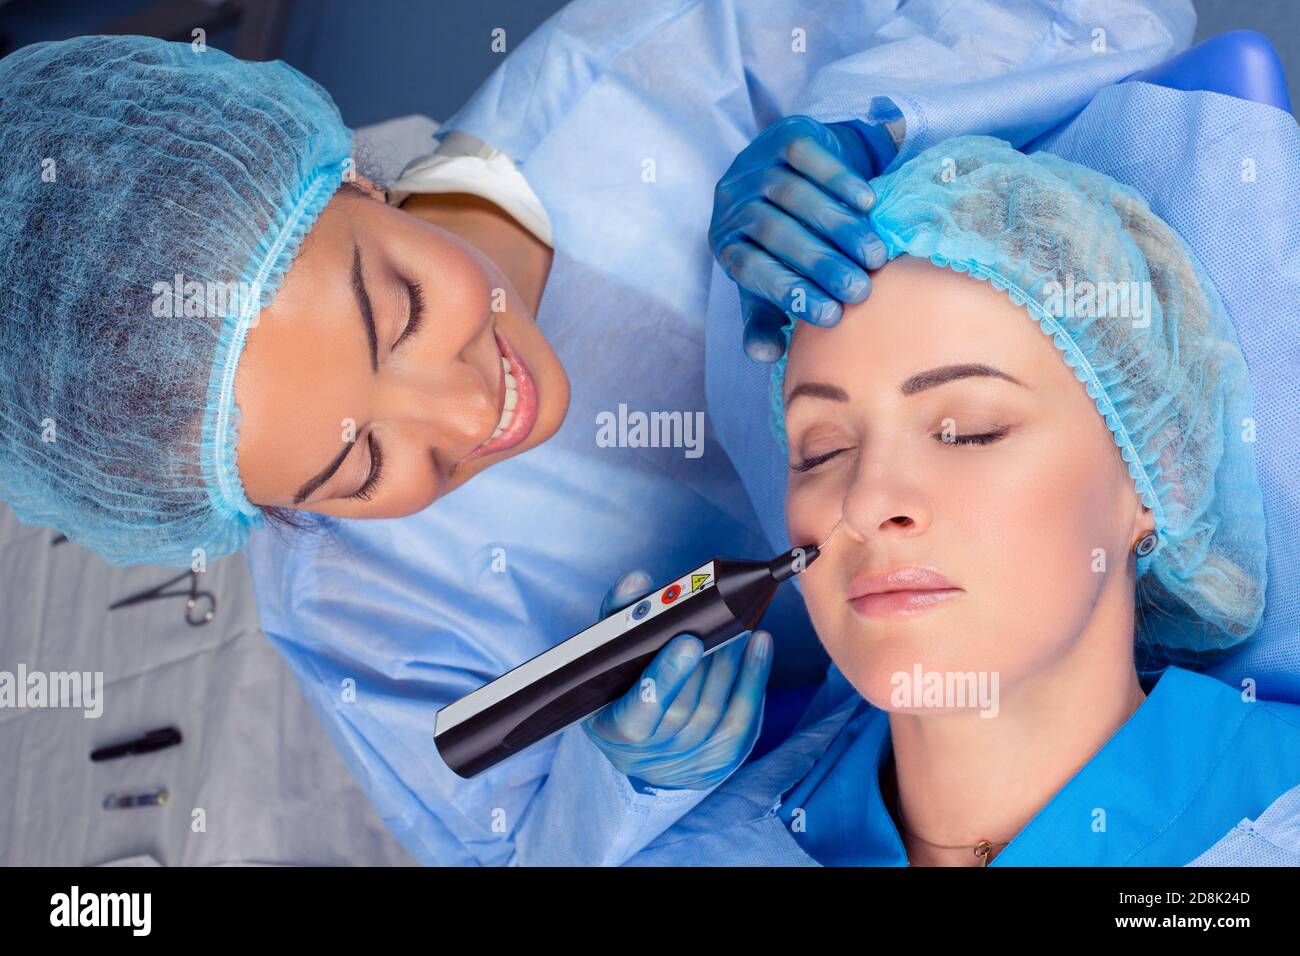 Woman having a non surgical procedure to remove nasolabial wrinkles with a laser device by a cosmetologist in a medical clinic. Thread lift procedure. Stock Photo